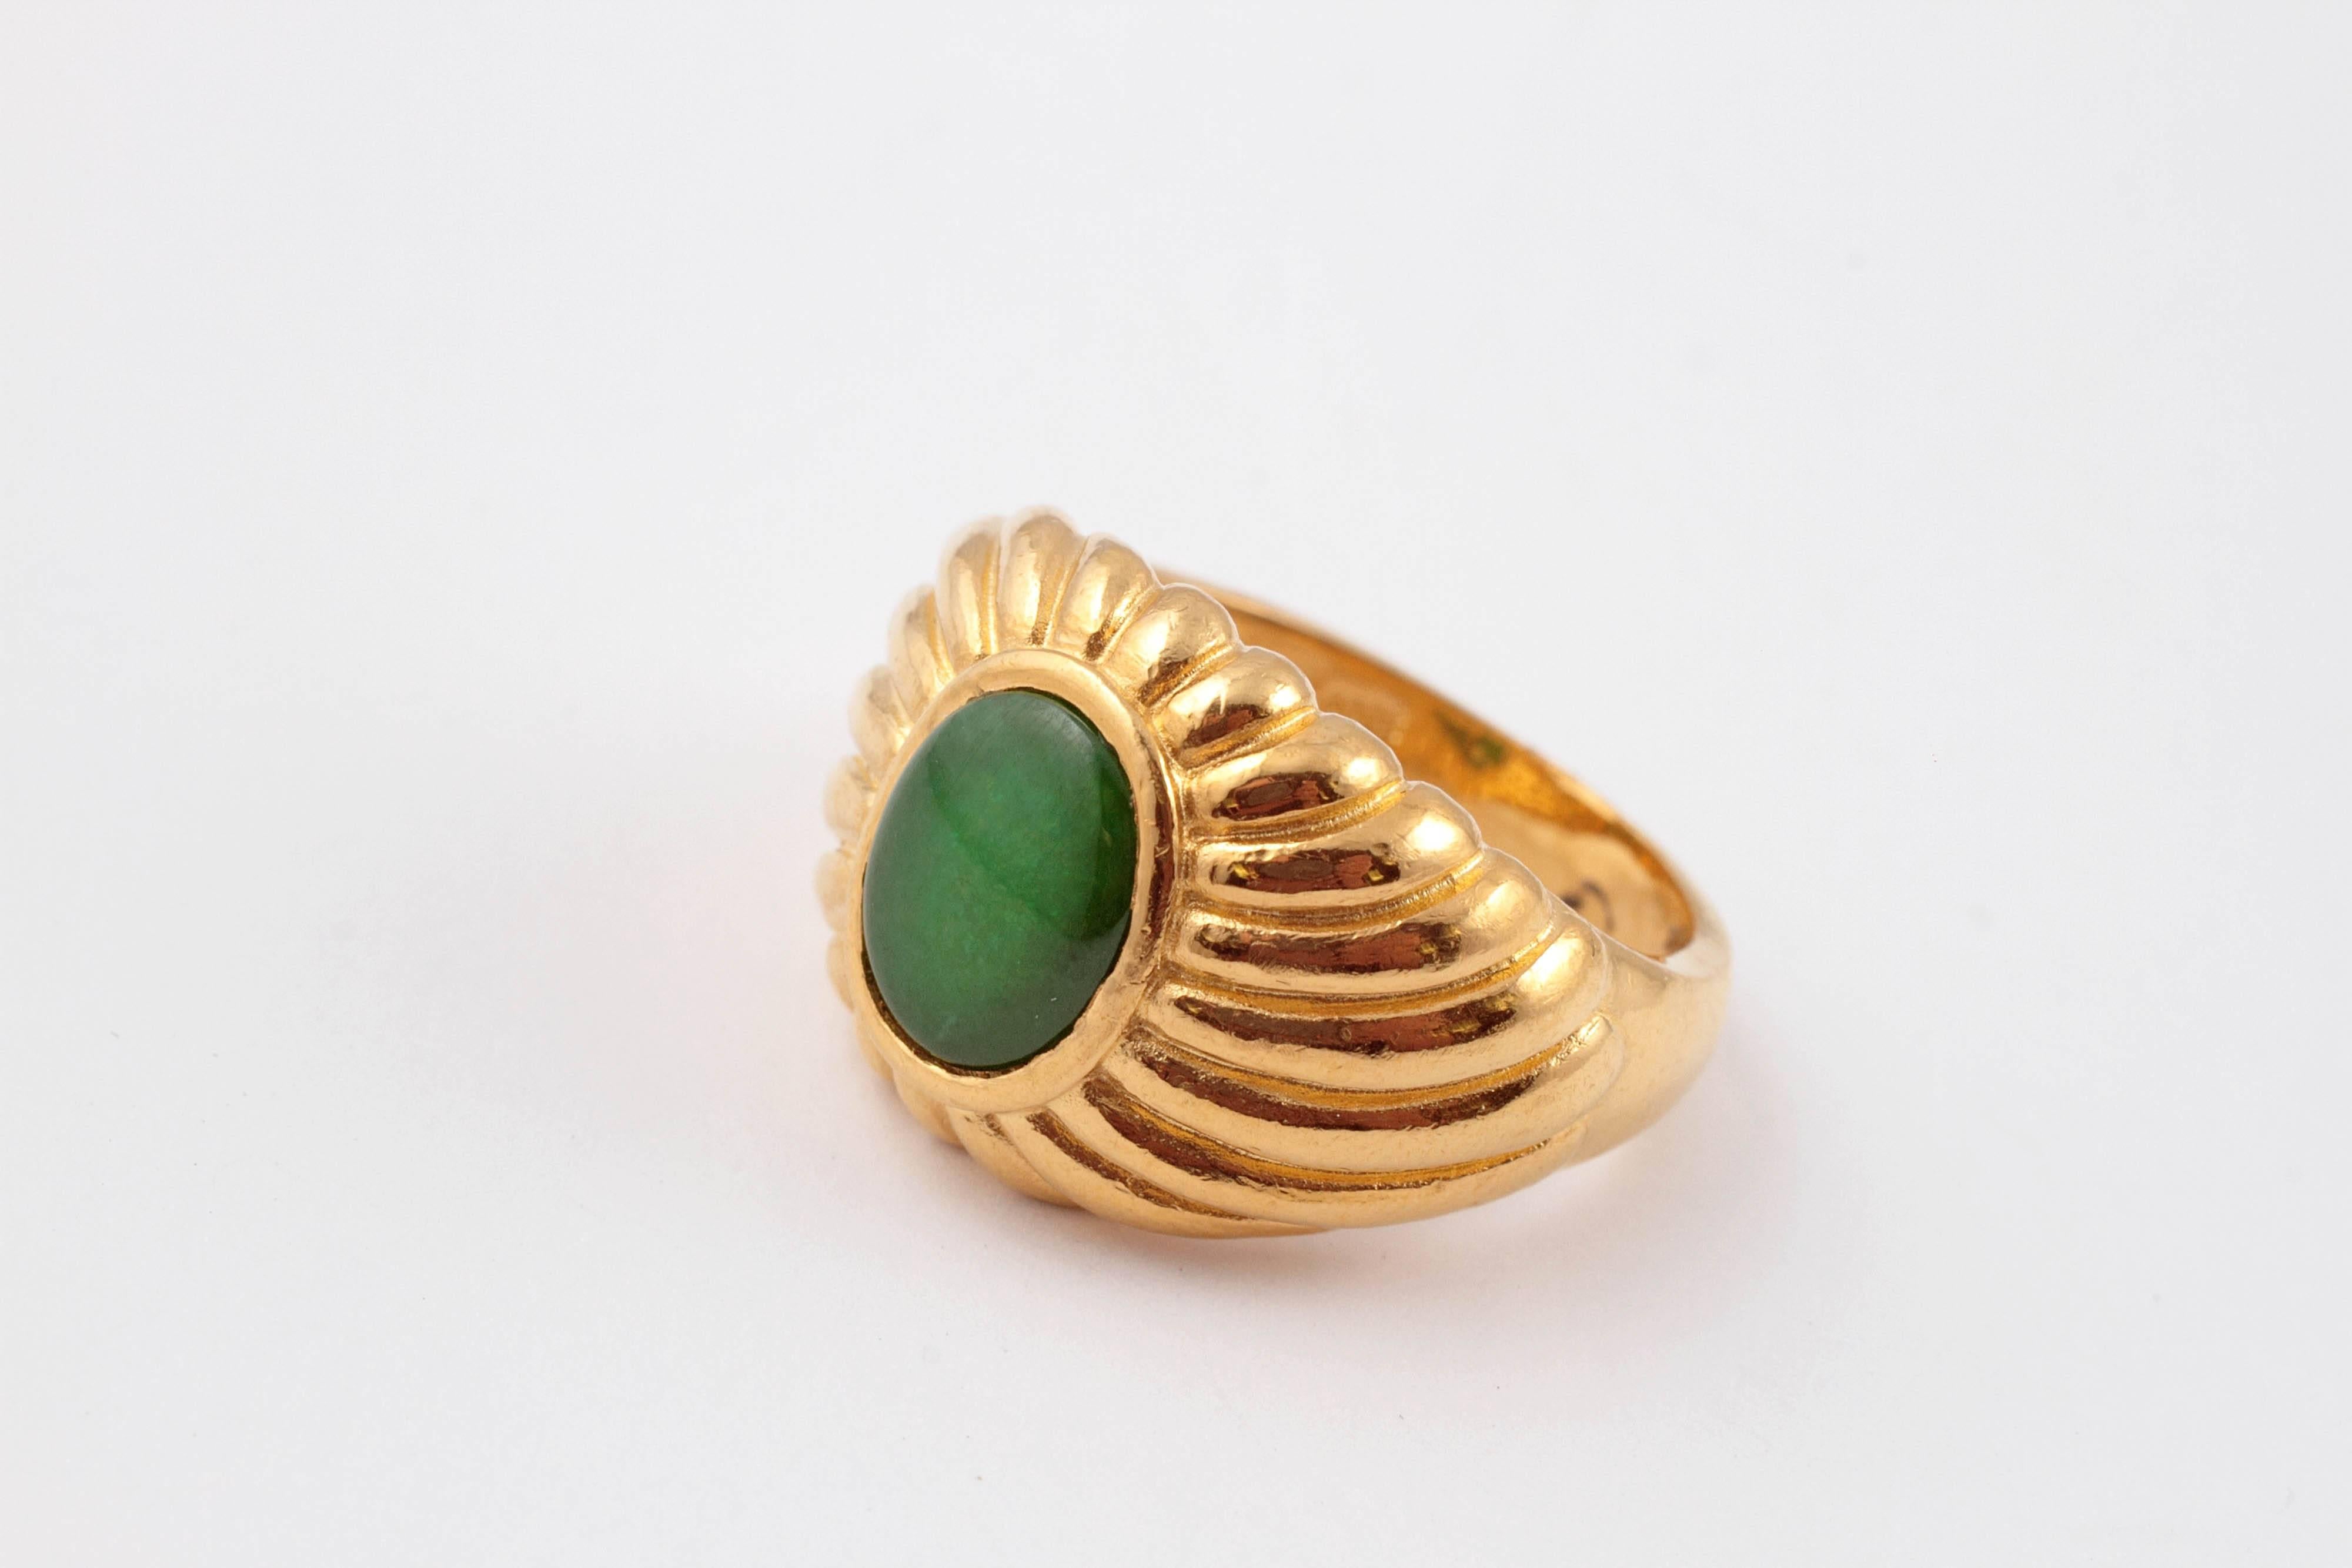 Tapering swirling style mounting, in 22 Karat yellow gold, centered with an oval-shaped, Jade.  Size 9.